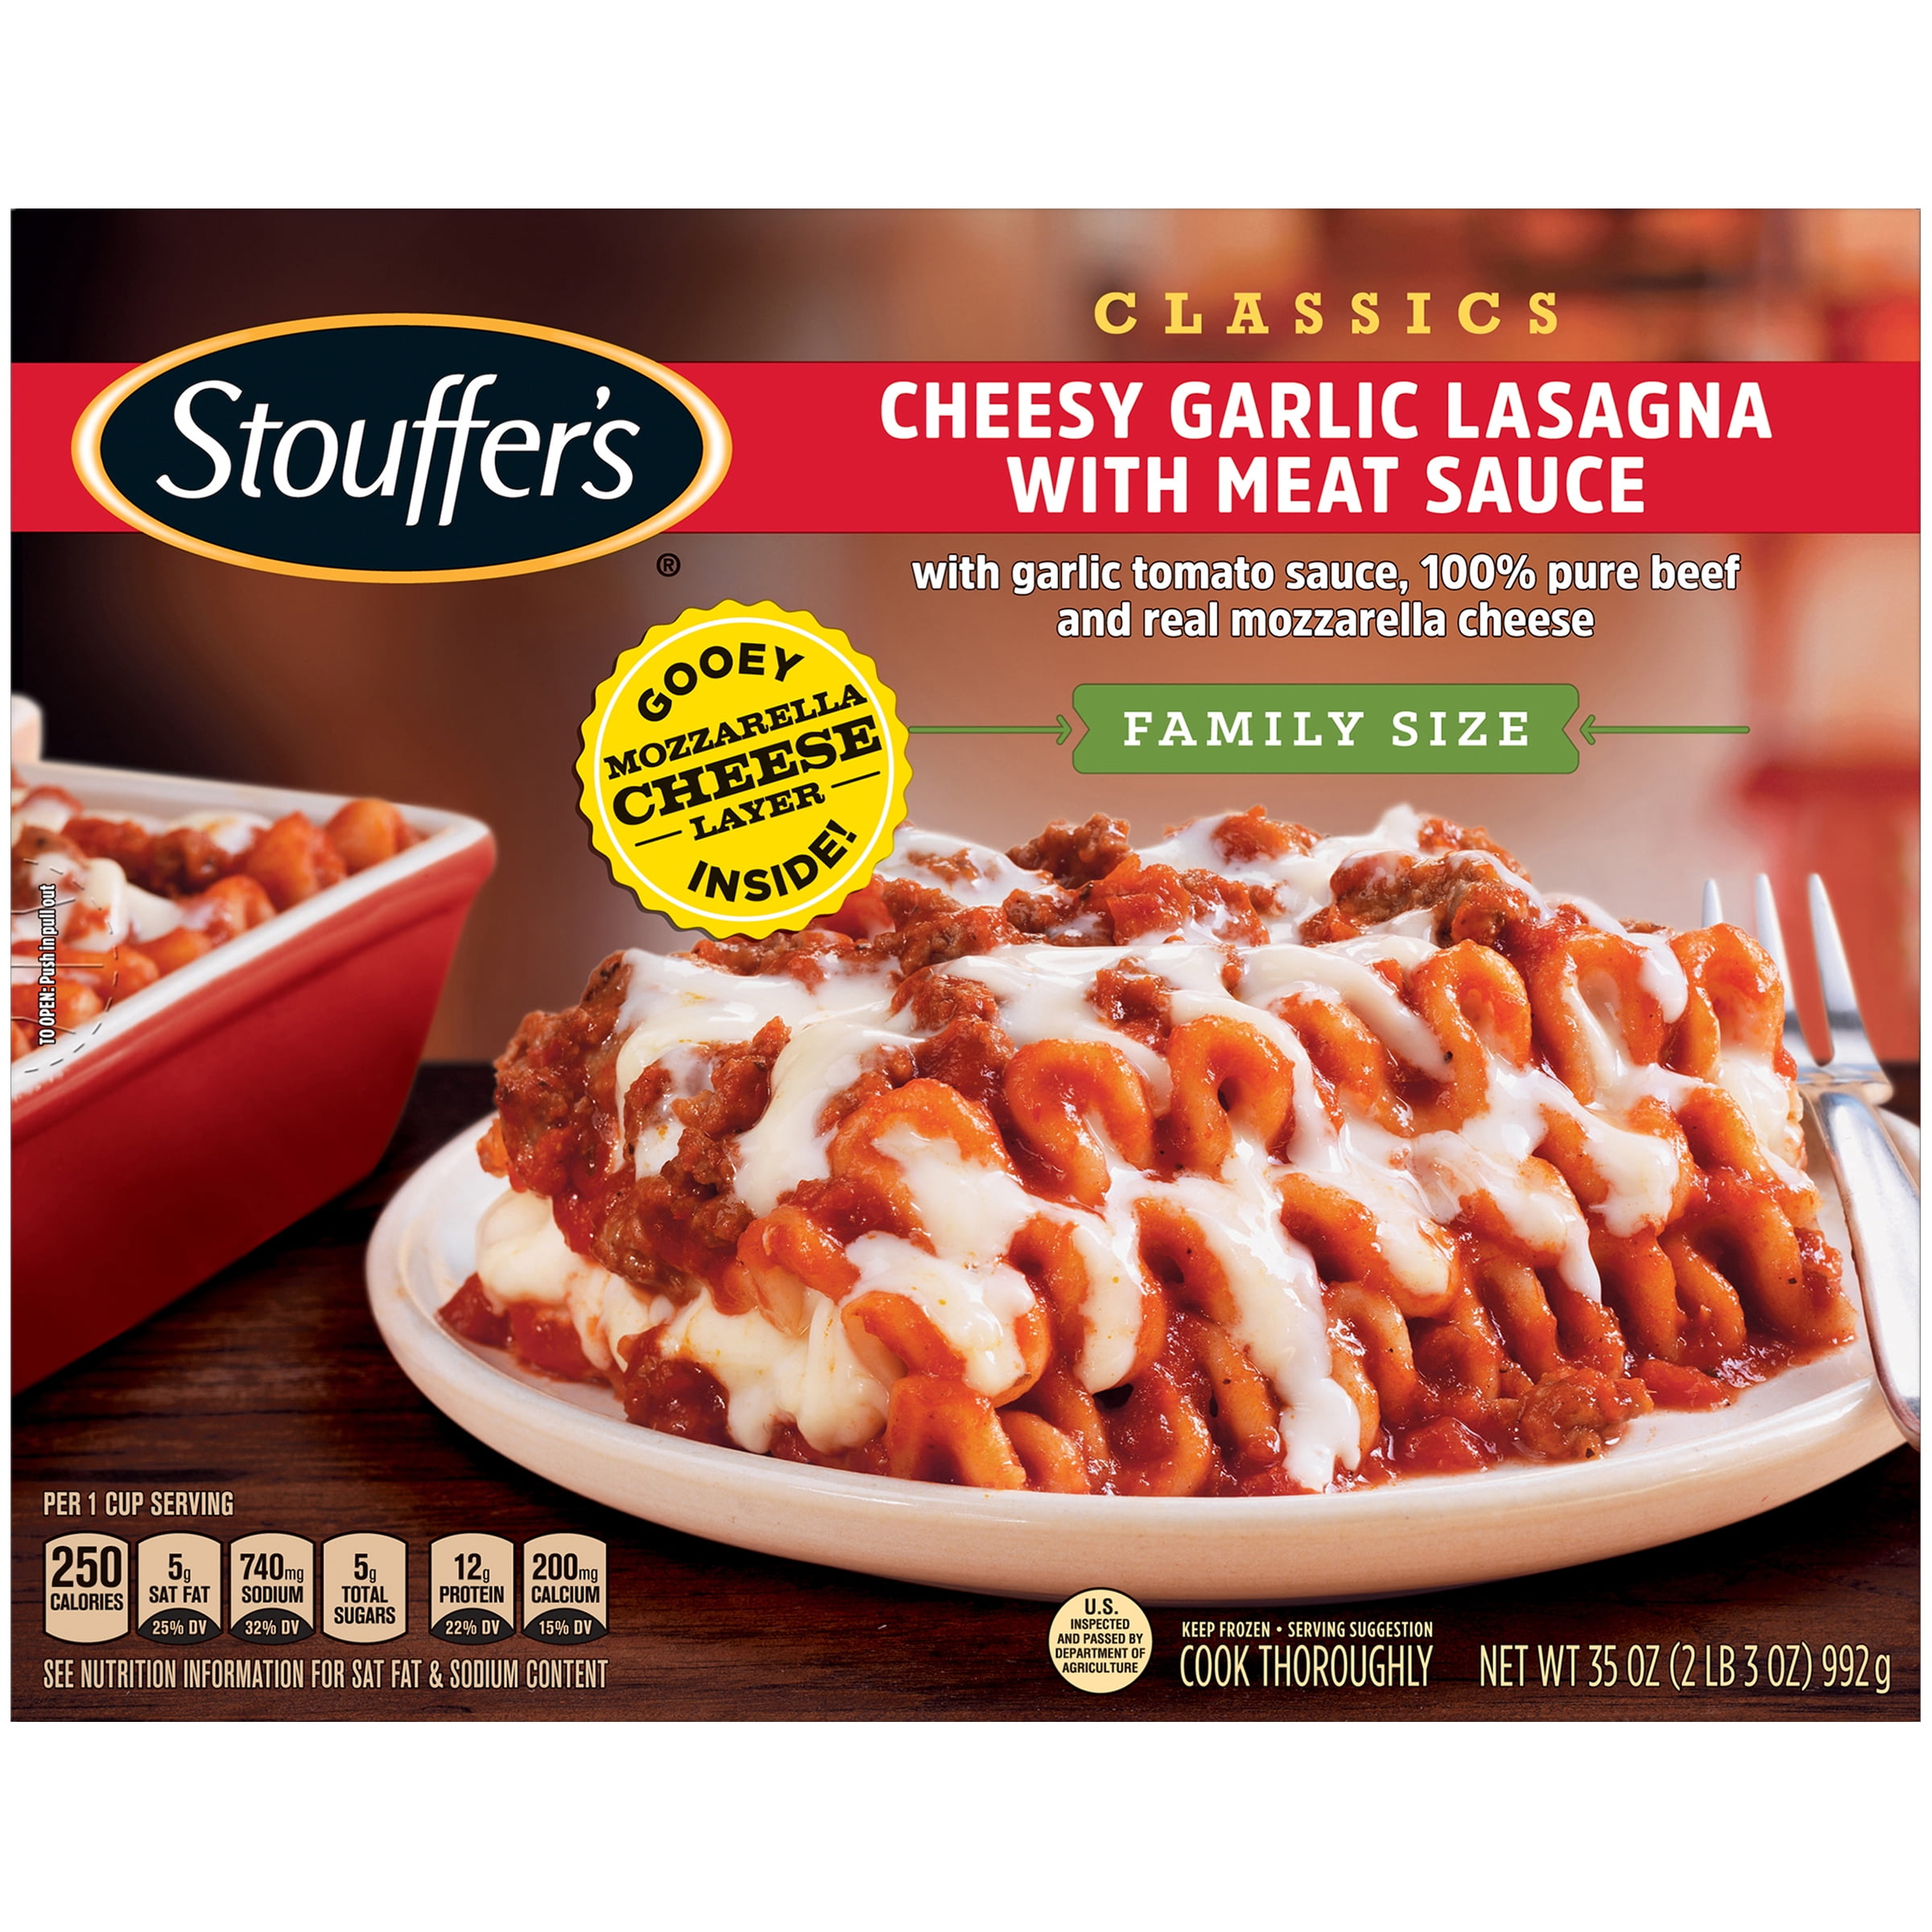 STOUFFER’S CLASSICS Cheesy Garlic Lasagna with Meat Sauce, Family Size